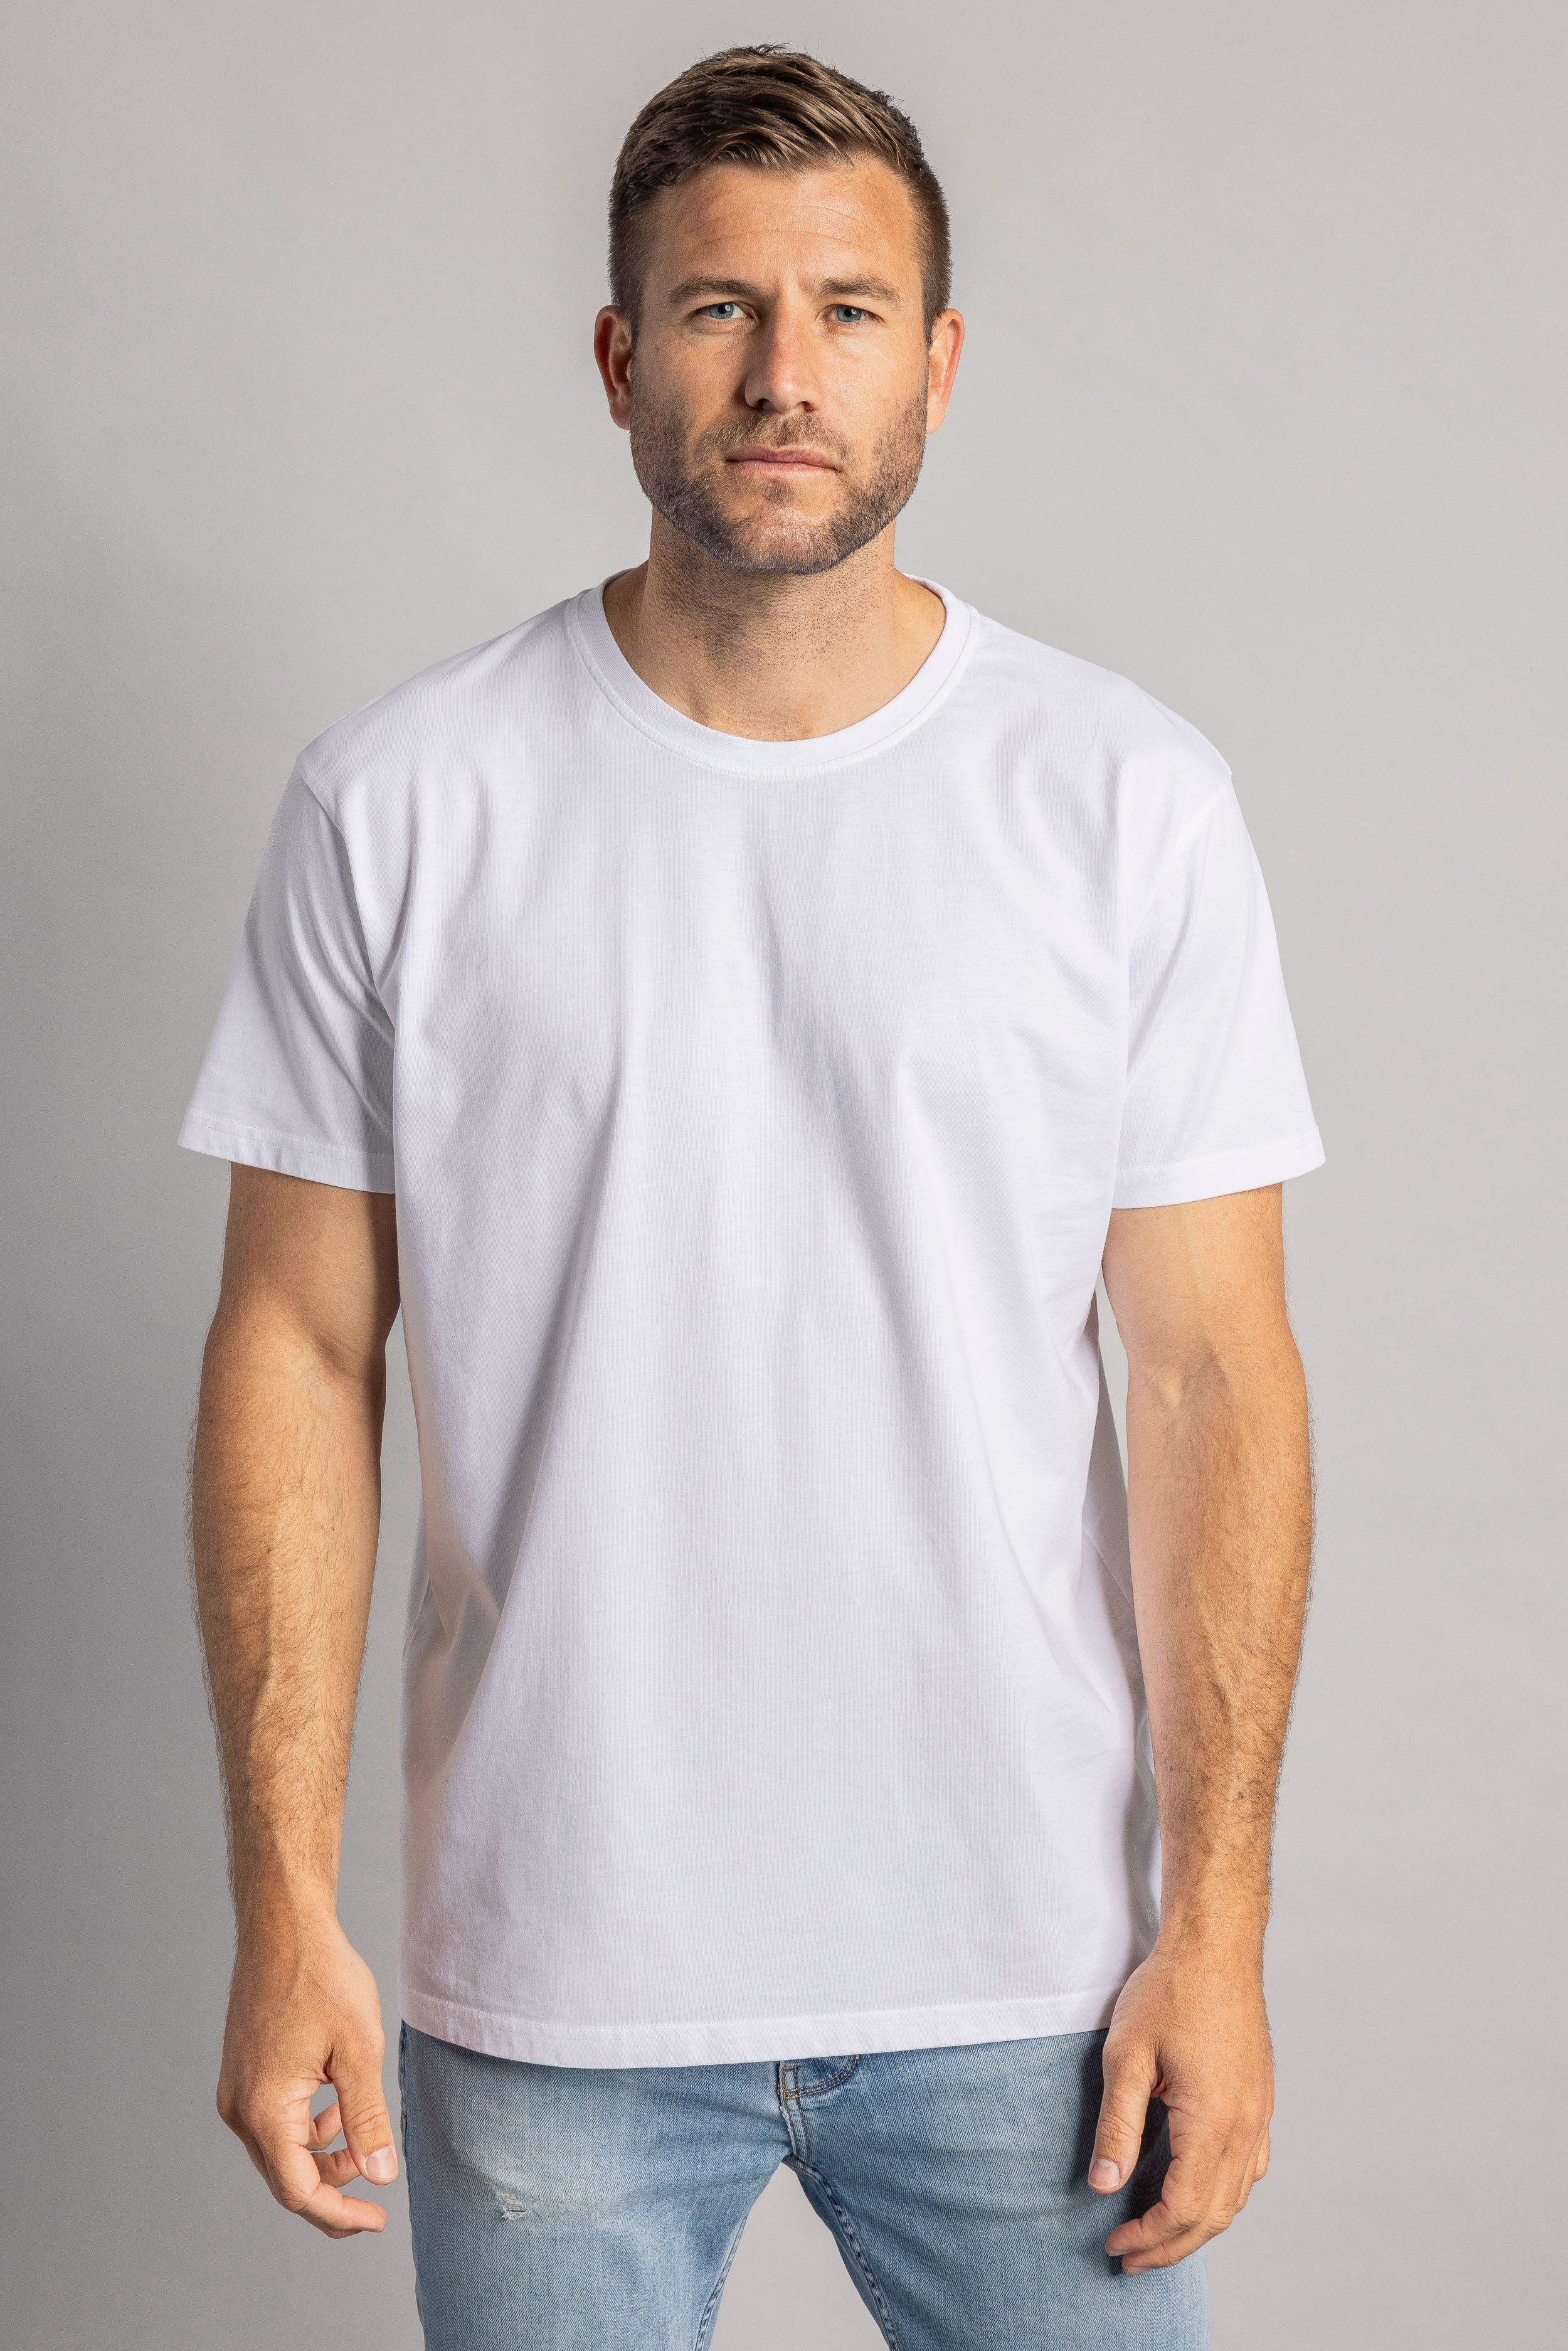 White T-shirt Premium Blank Standard made from 100% organic cotton from DIRTS